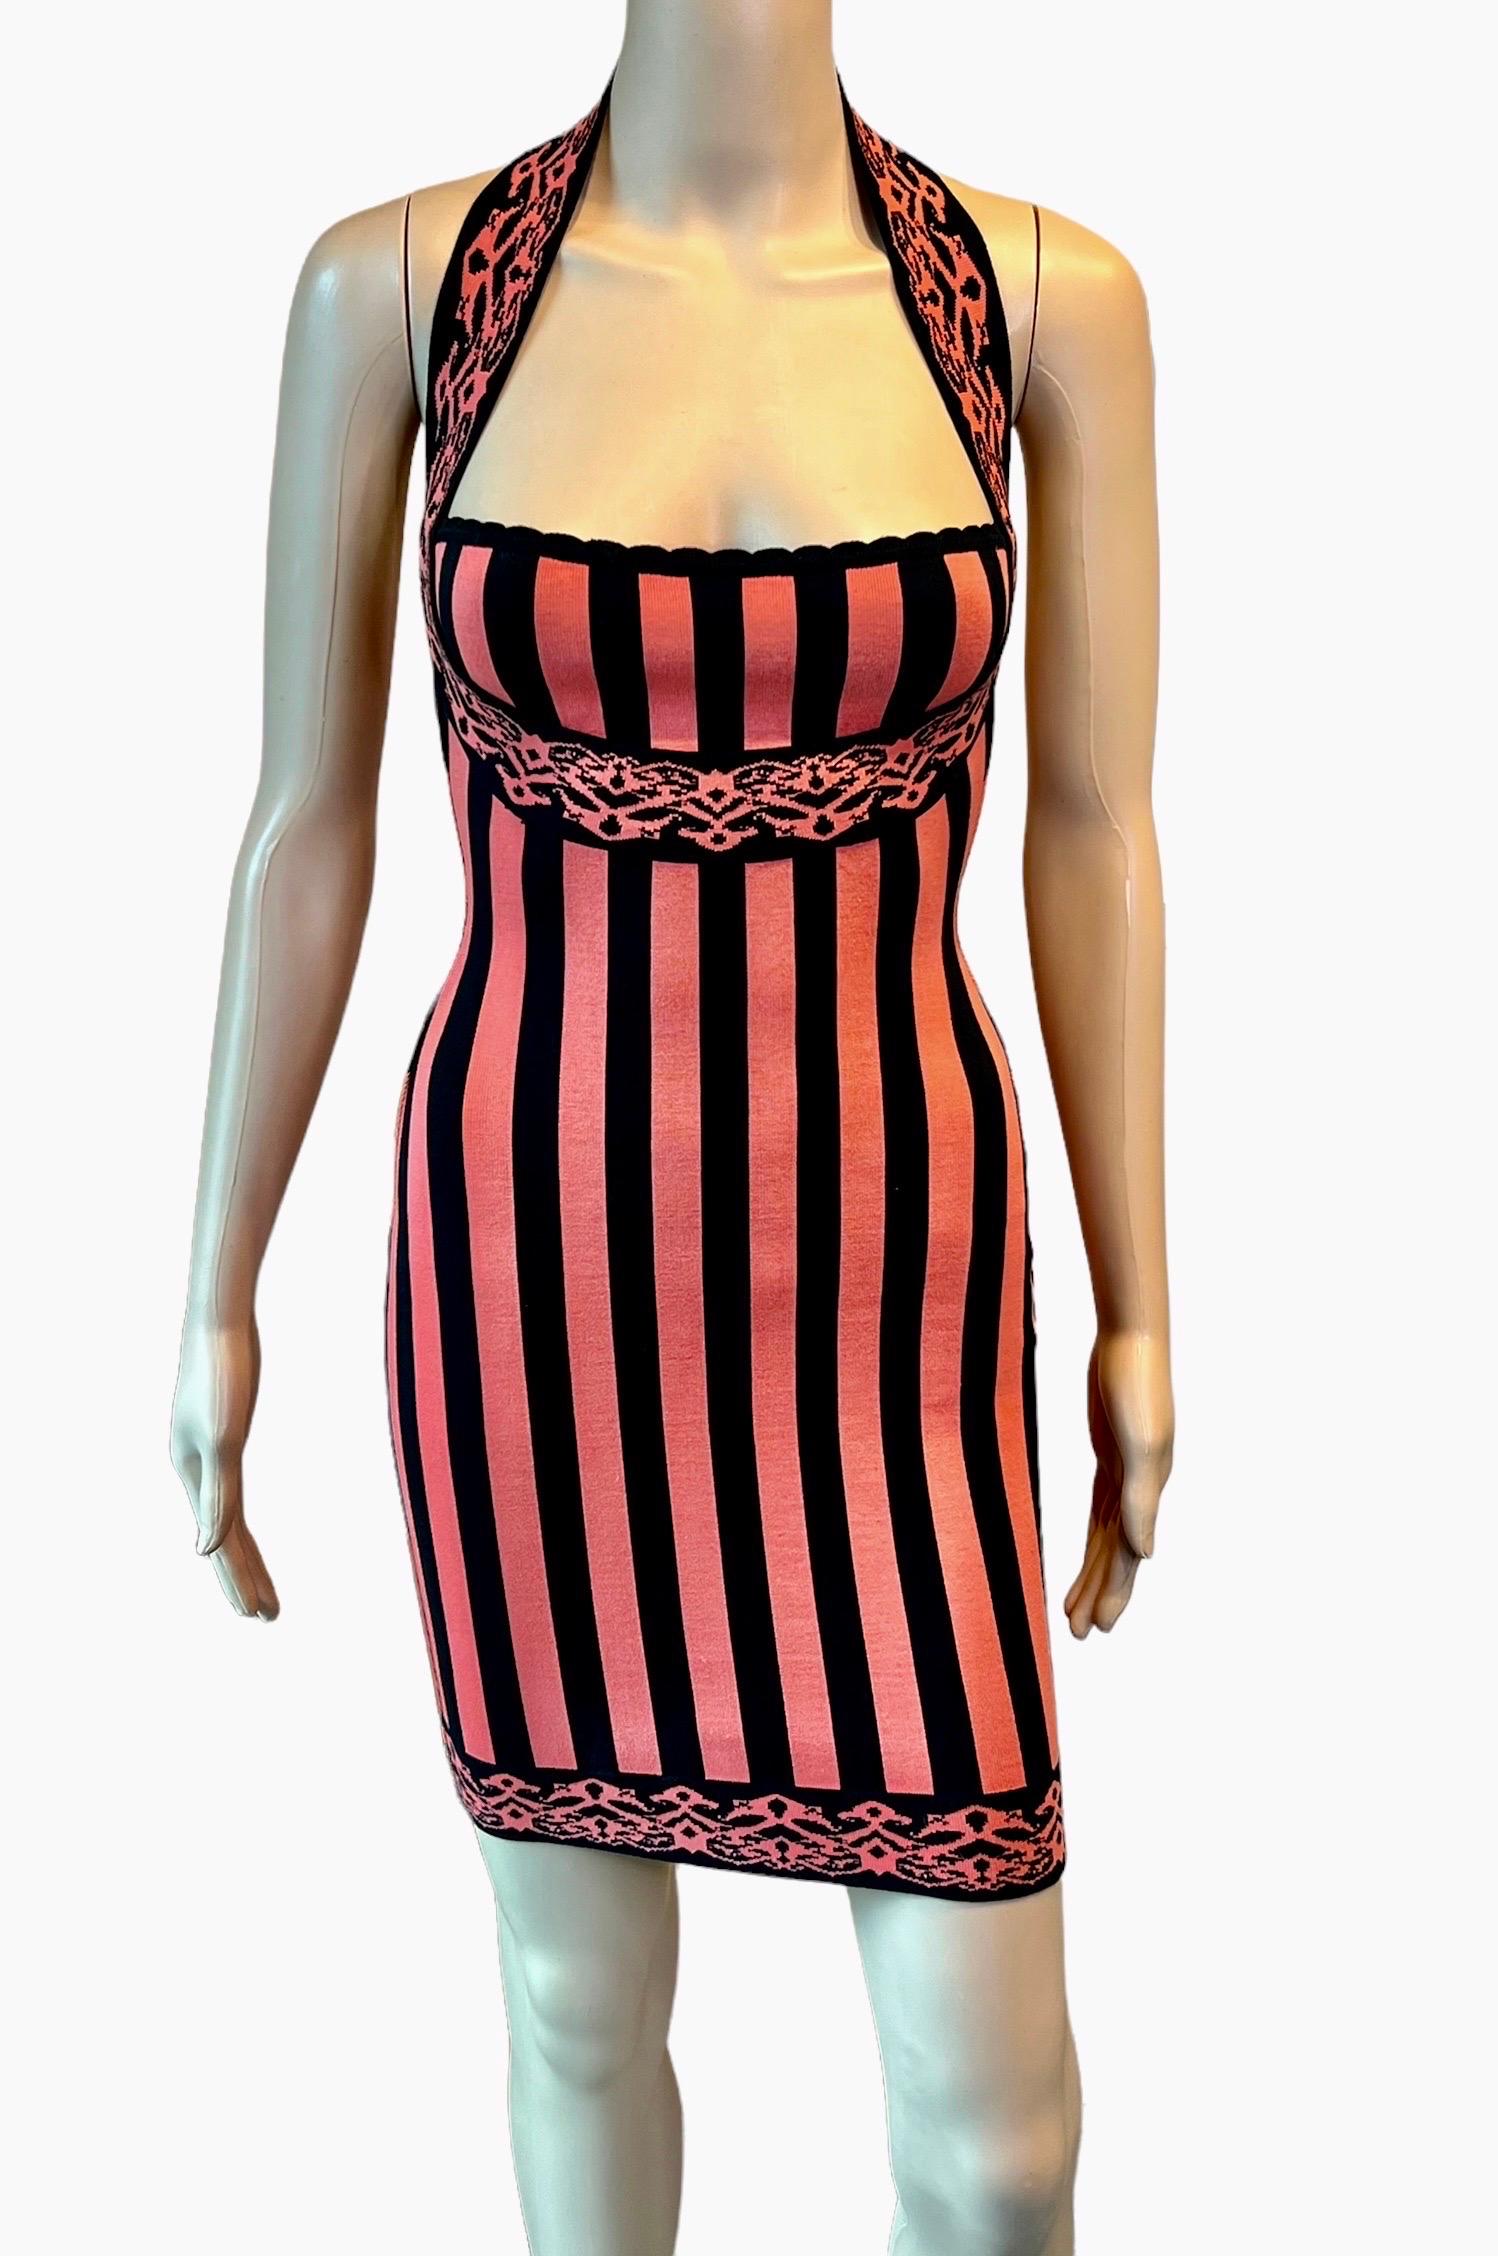 Azzedine Alaia S/S 1992 Runway Bustier Striped Bodycon Mini Dress Size M

Look 84 from the Spring 1992 Collection ( longer version).